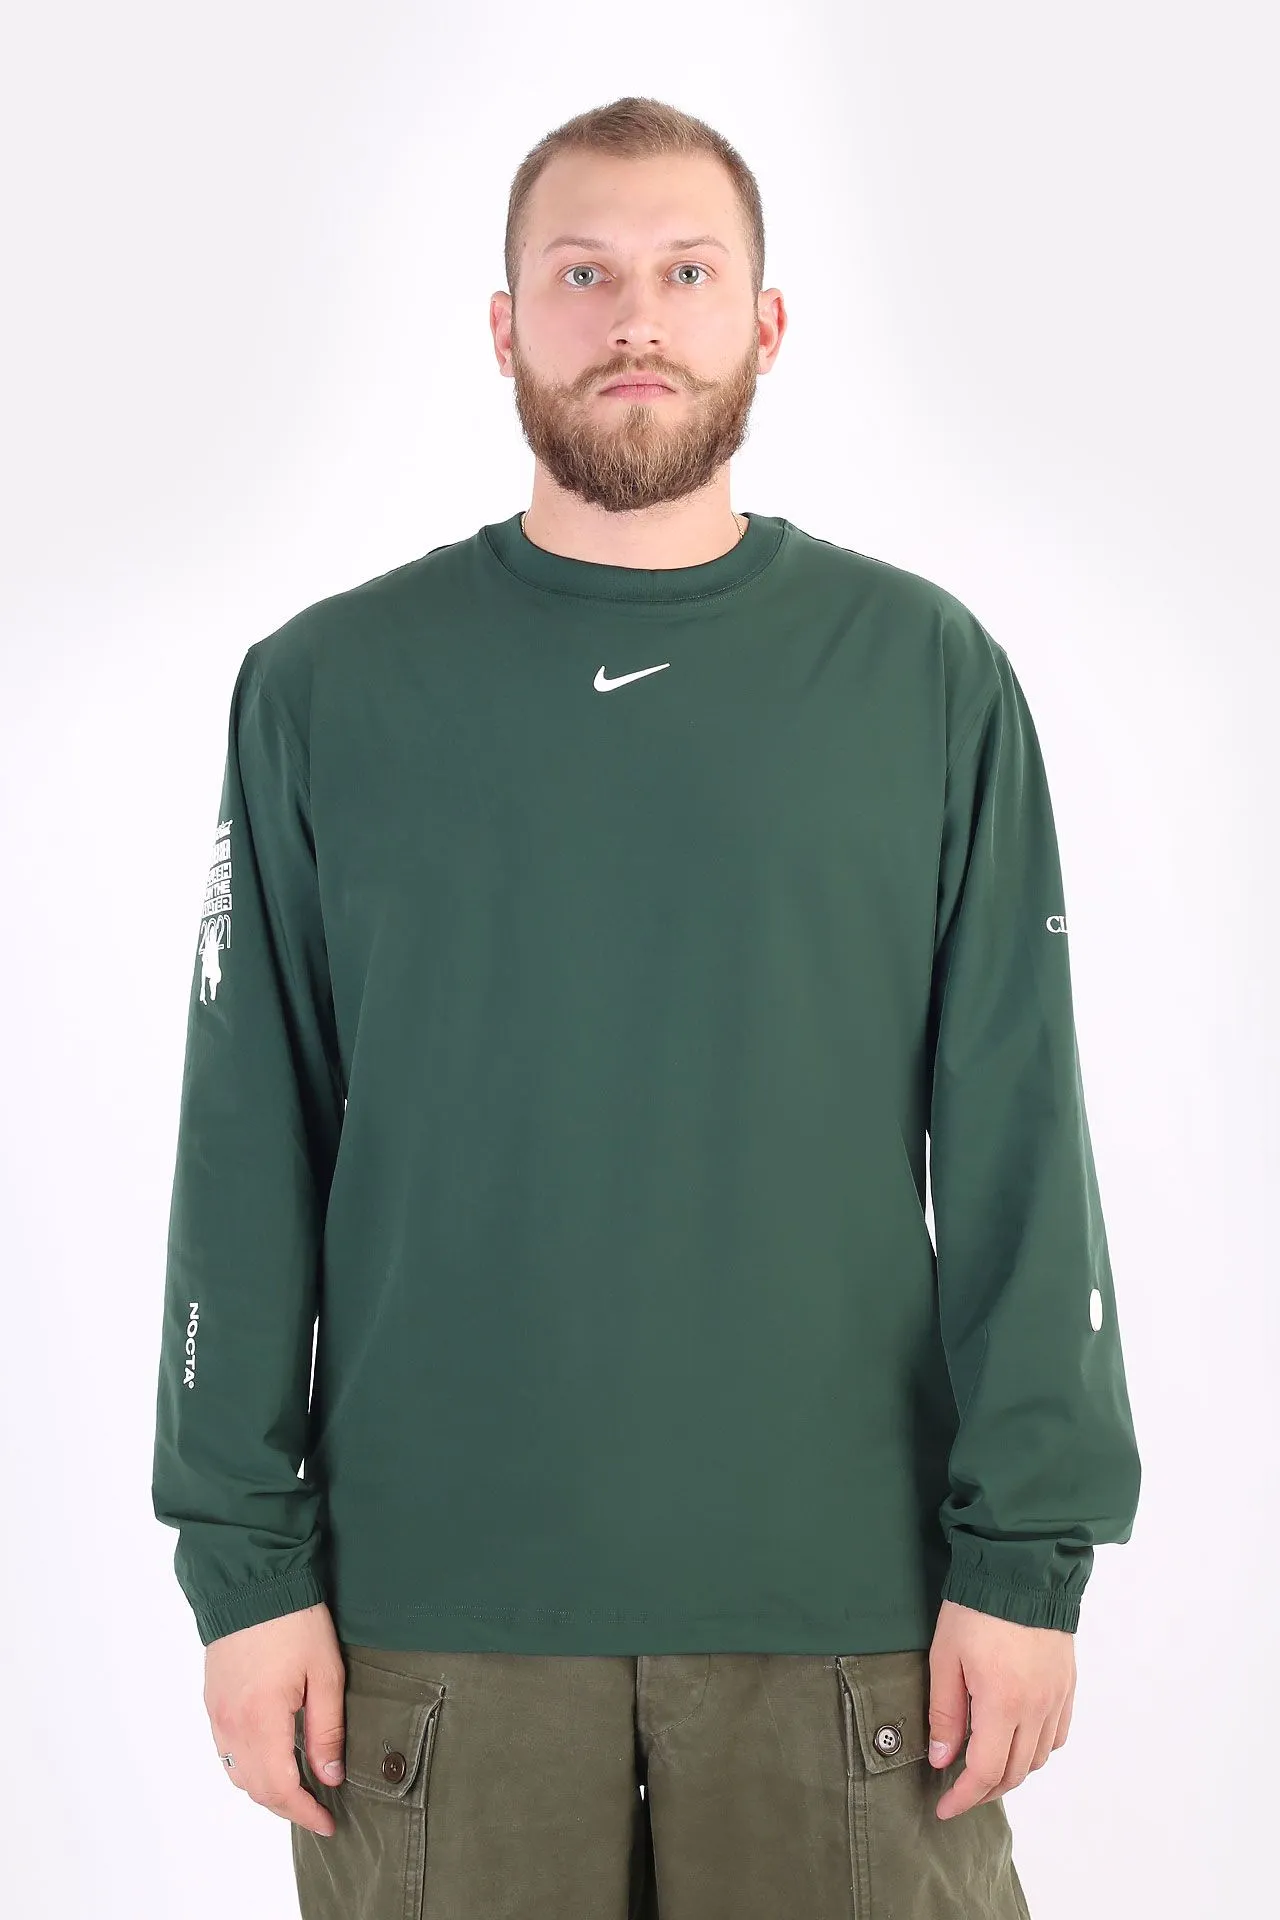 Nike NOCTA GOLF LONG SLEEVE WOVEN CREW S | ito-thermie.nl